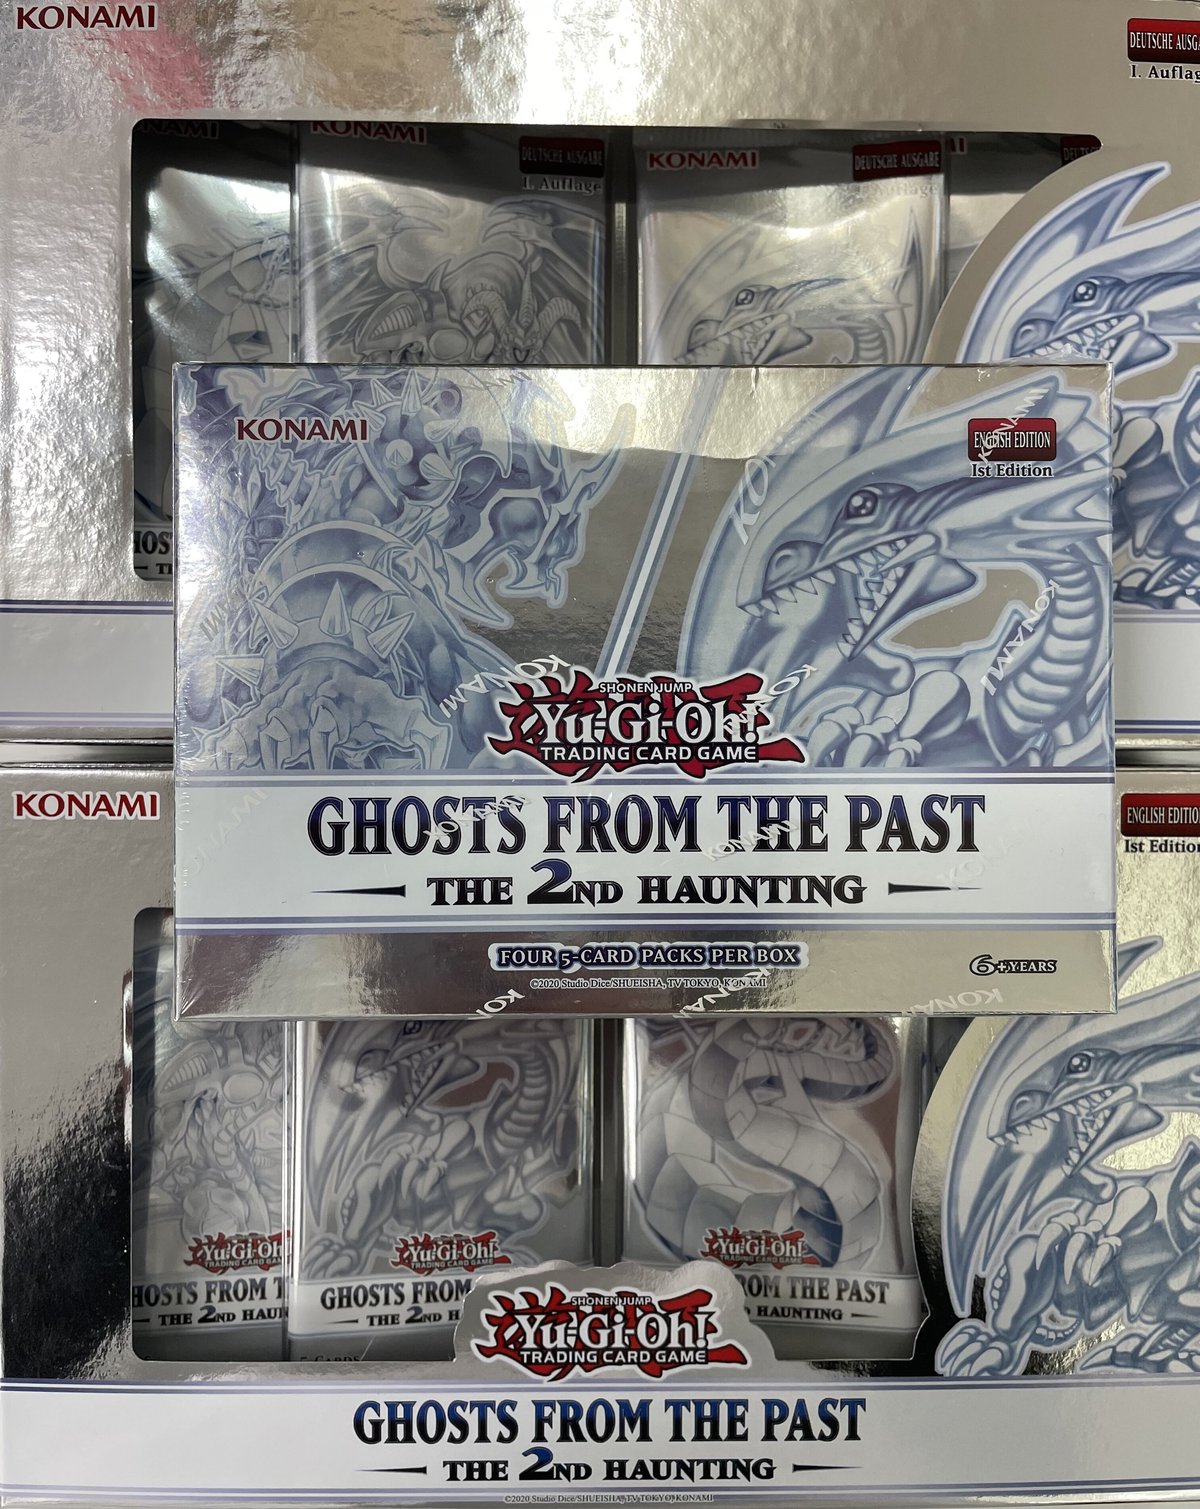 EU版 北米版 ドイツ版 GHOSTS FROM THE PAST 2nd HAUNTING...